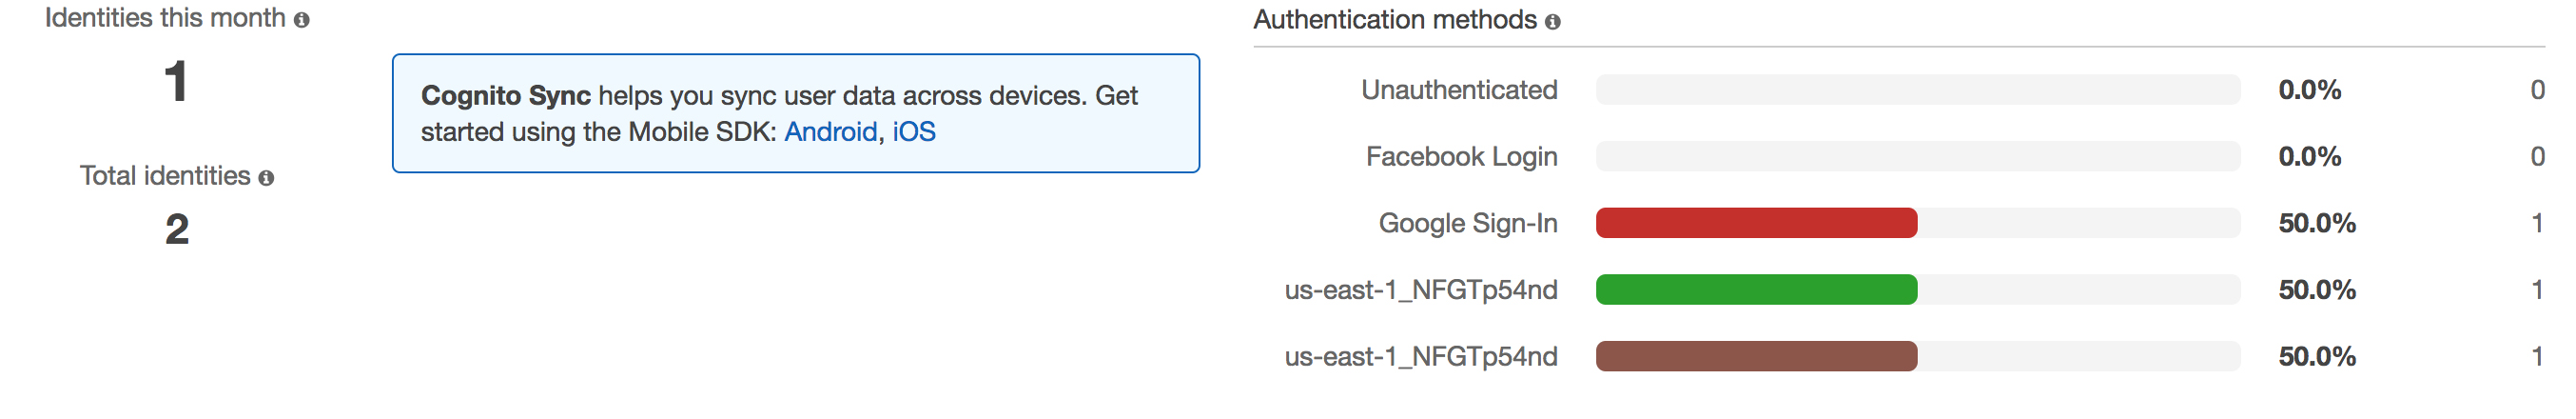 ionic AWS Google oauth identity result